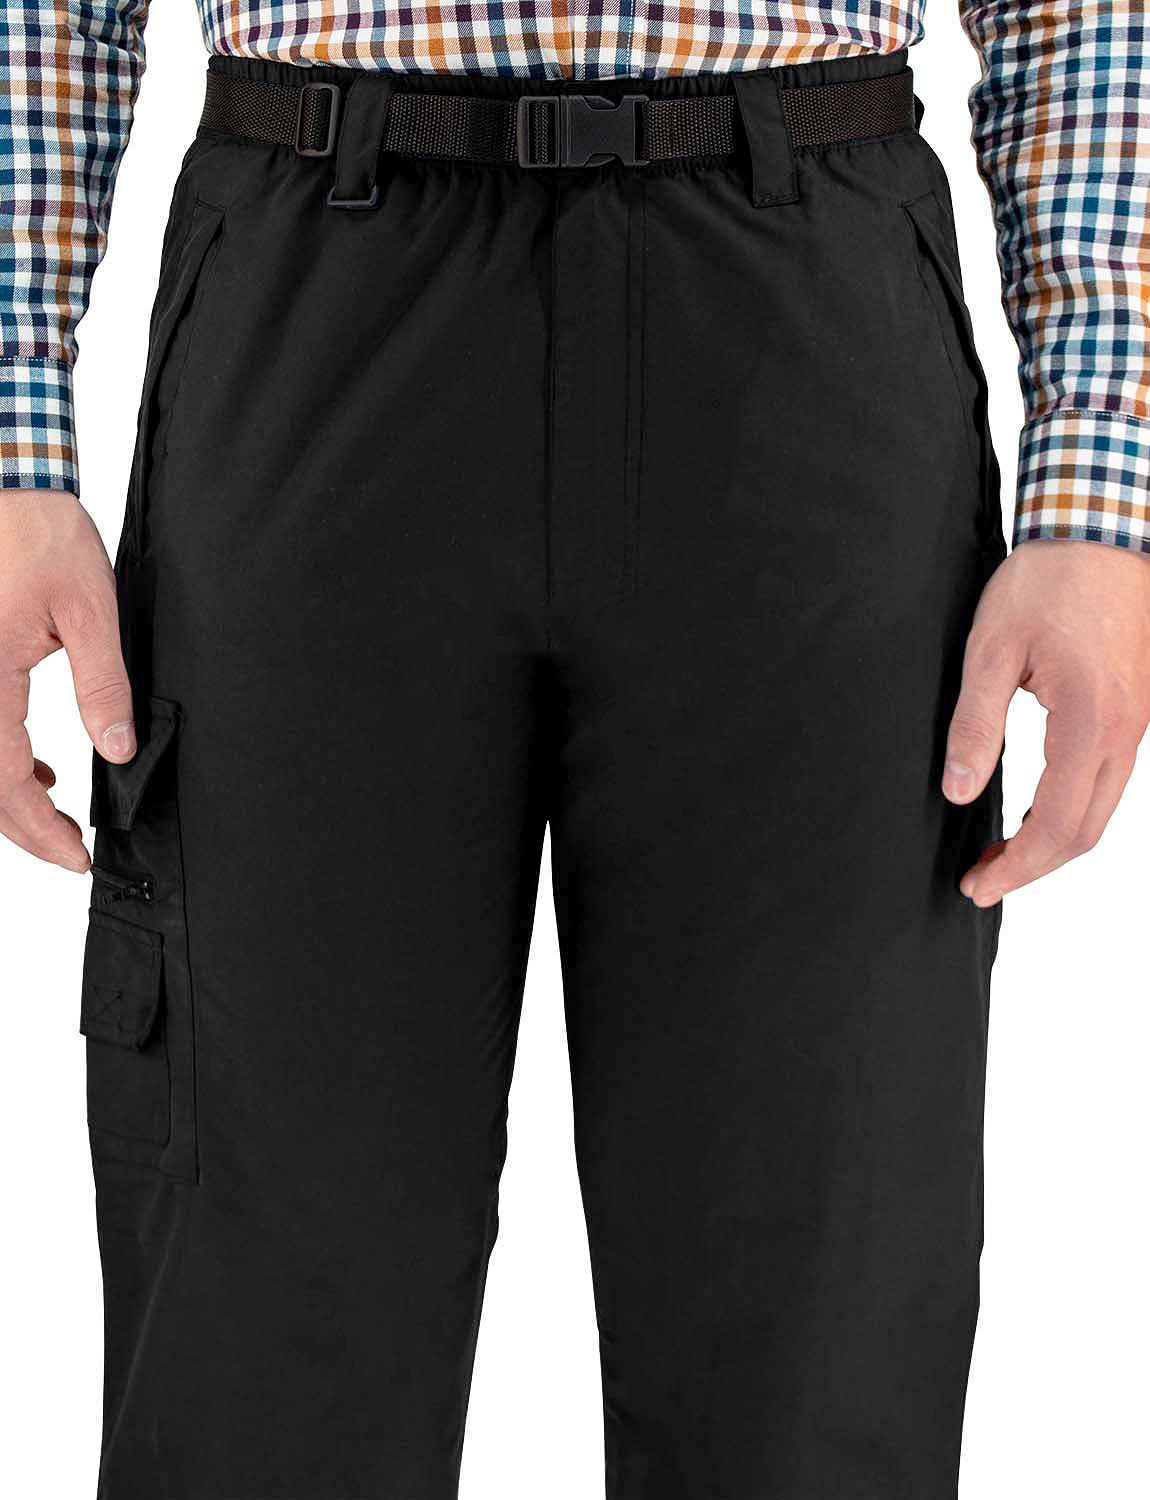 Pegasus Fleece Lined Waterproof Action Trouser With Belt | Chums